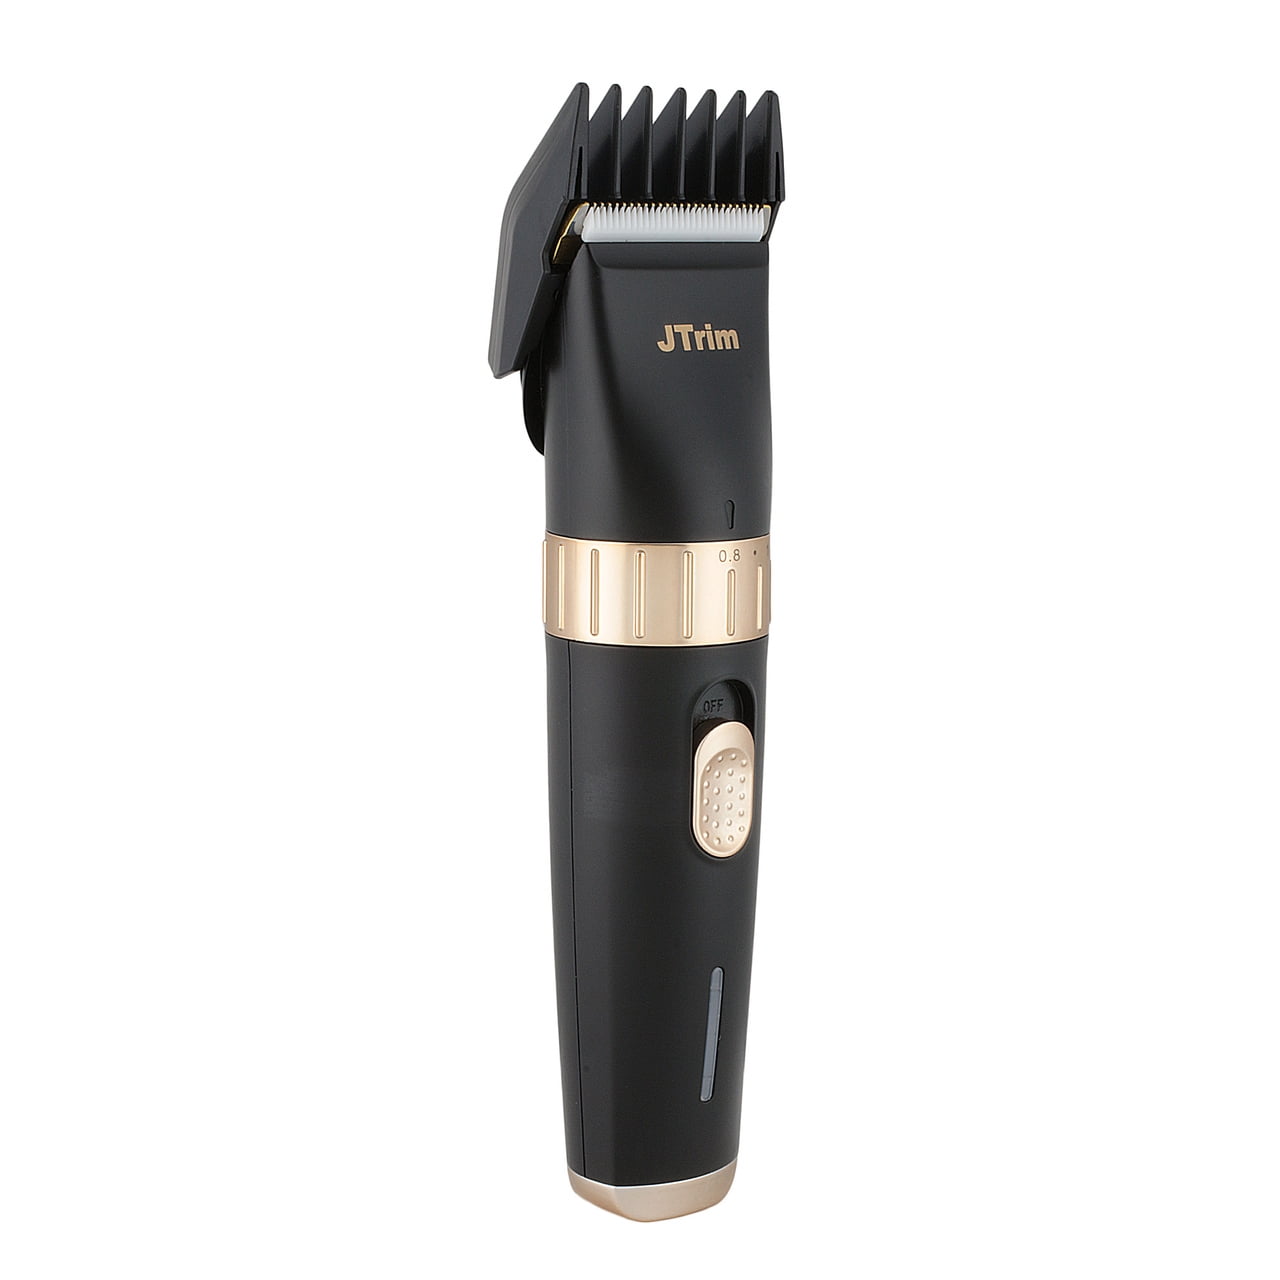 cordless hair clippers for men